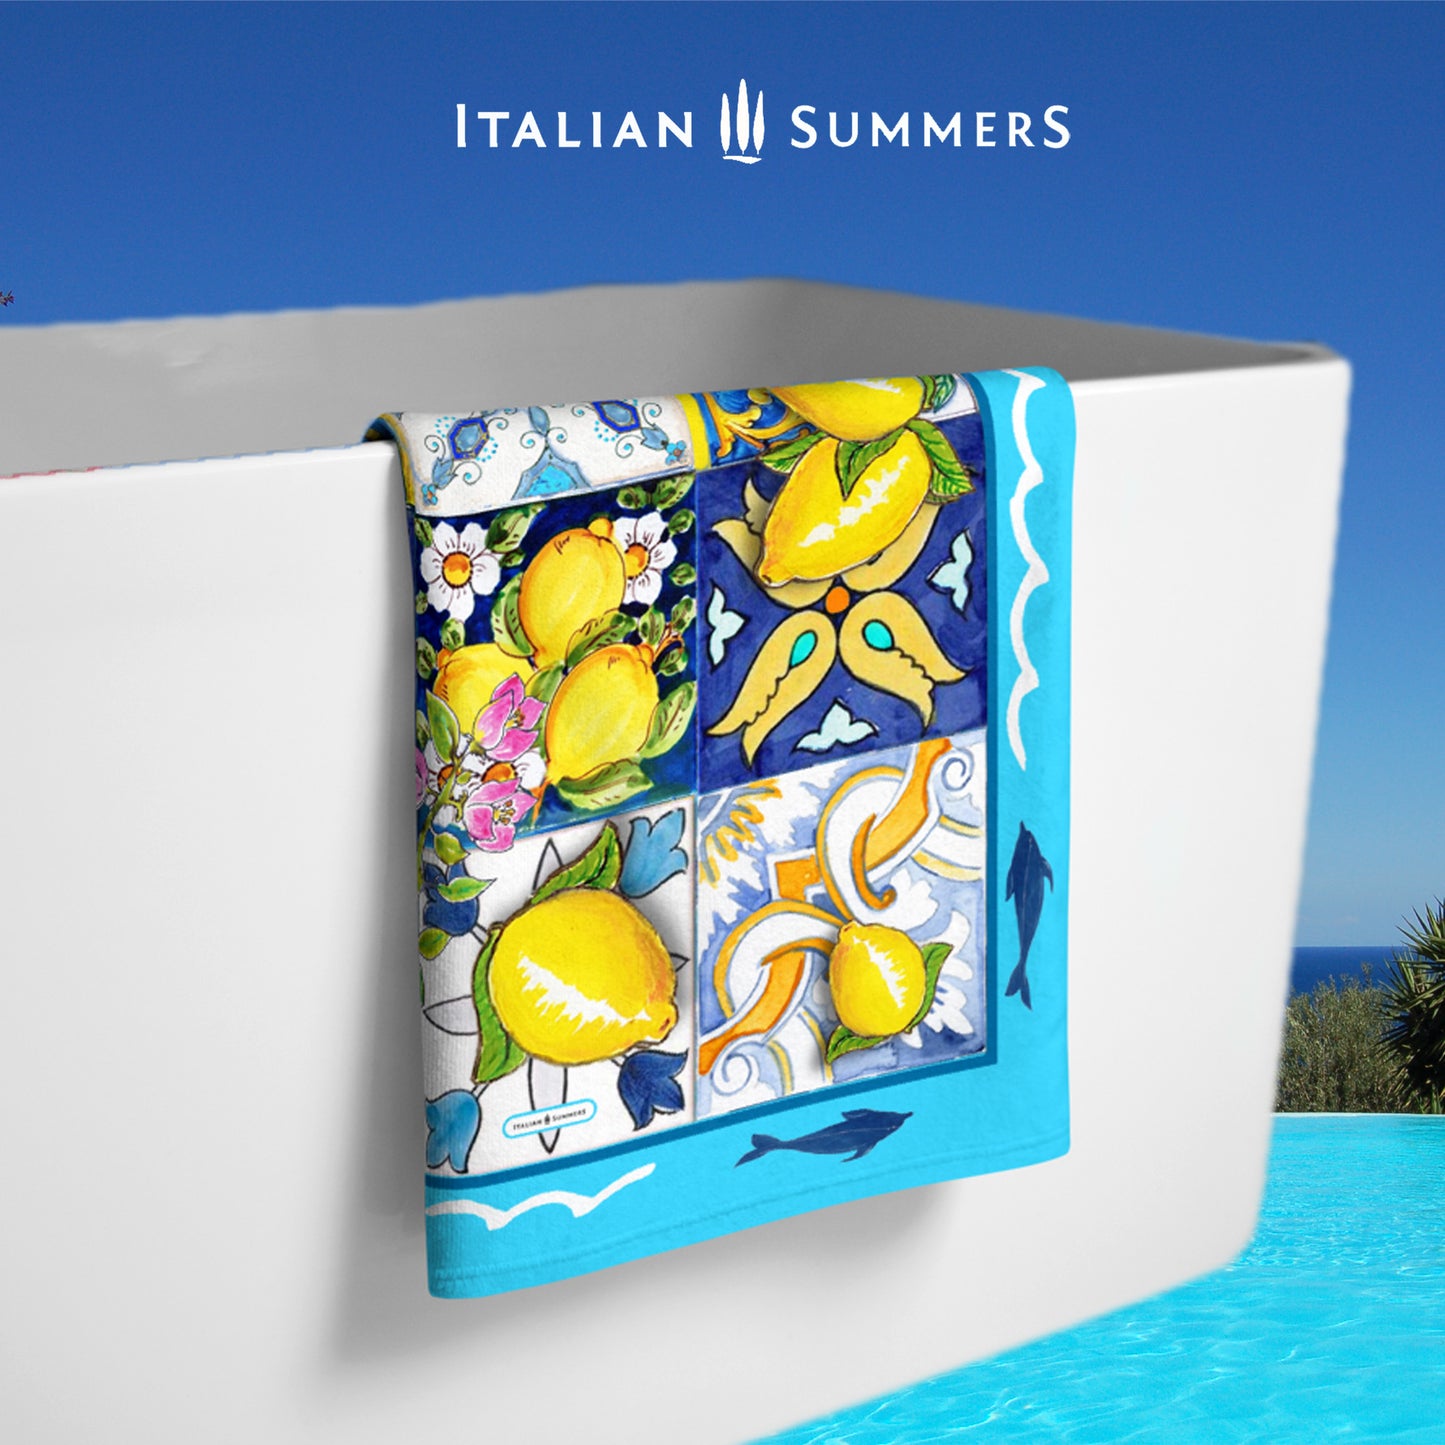 Beautiful Italy inspired beach towel printed with a turquoise rim with dolphins and a field of multi-colored italian maiolica tiles strewn with bunches of Sorrento lemons with flowers. Made by Italian Summers